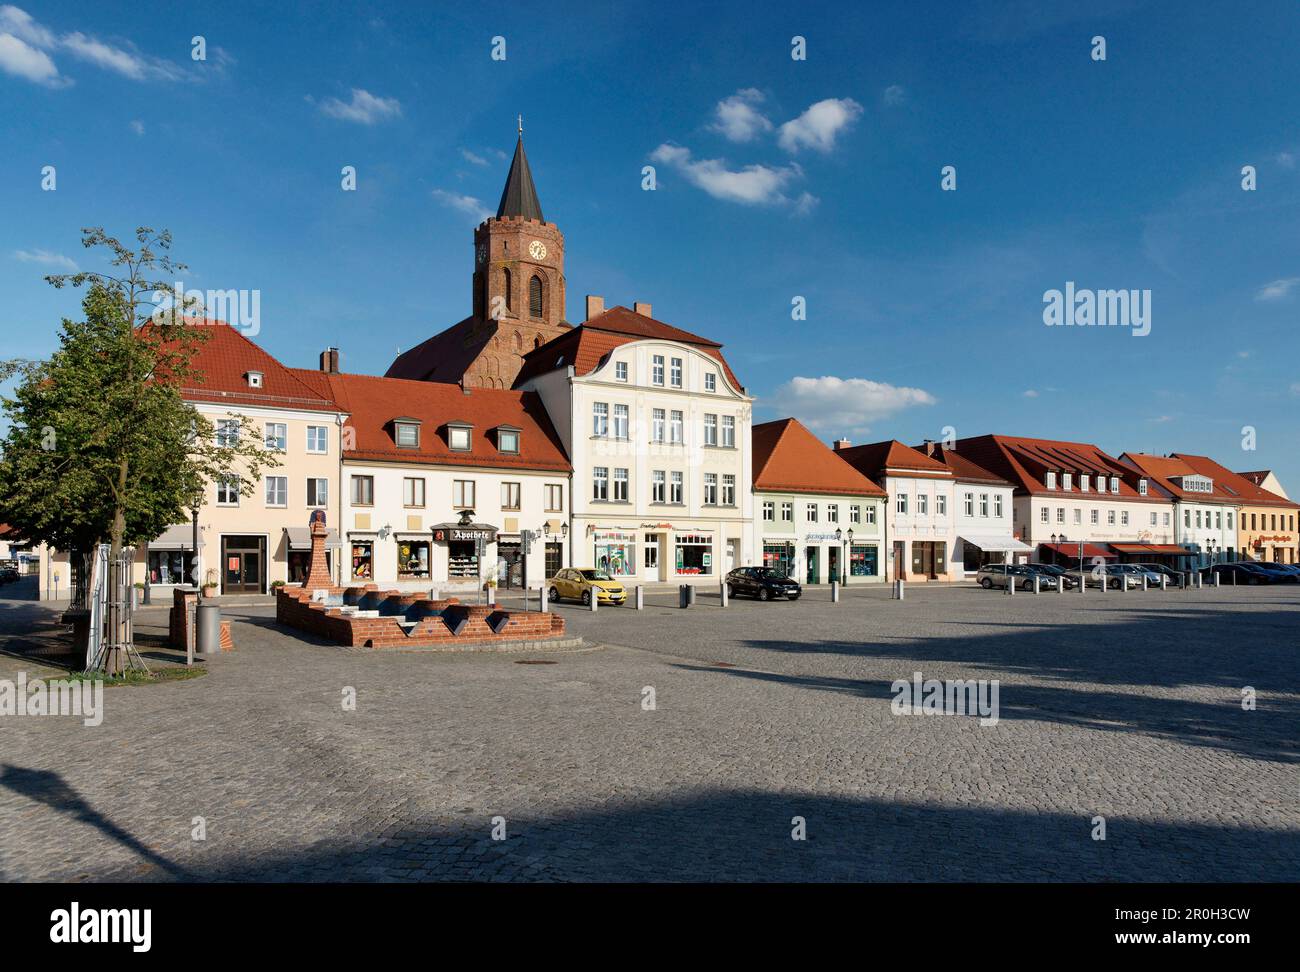 View of market place and St. Mary's church, Beeskow, Land Brandenburg, Germany, Europe Stock Photo